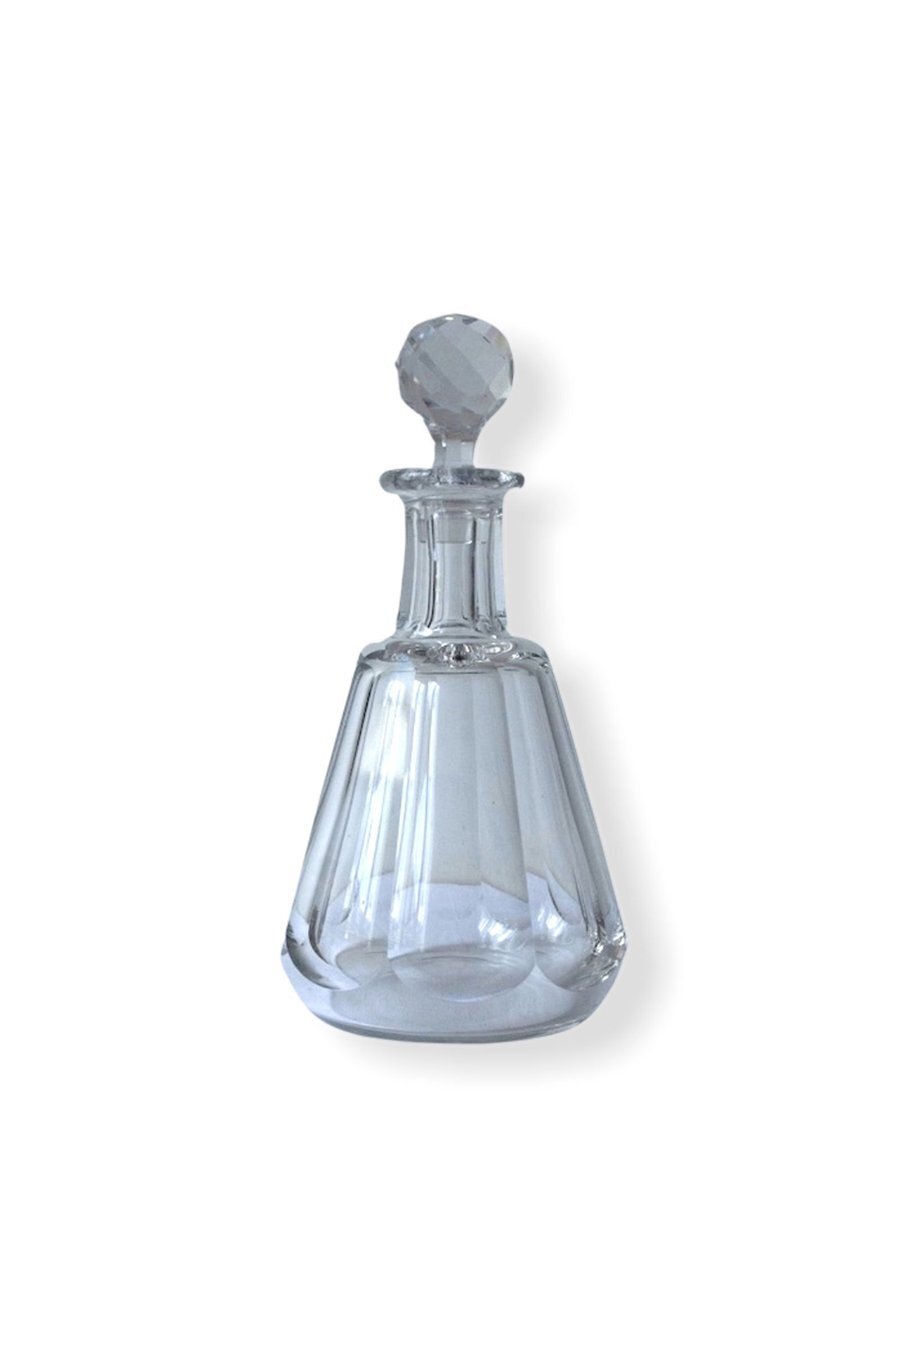 Faceted-Carafe-1600x2400-for-The-Avenue_900x.jpg